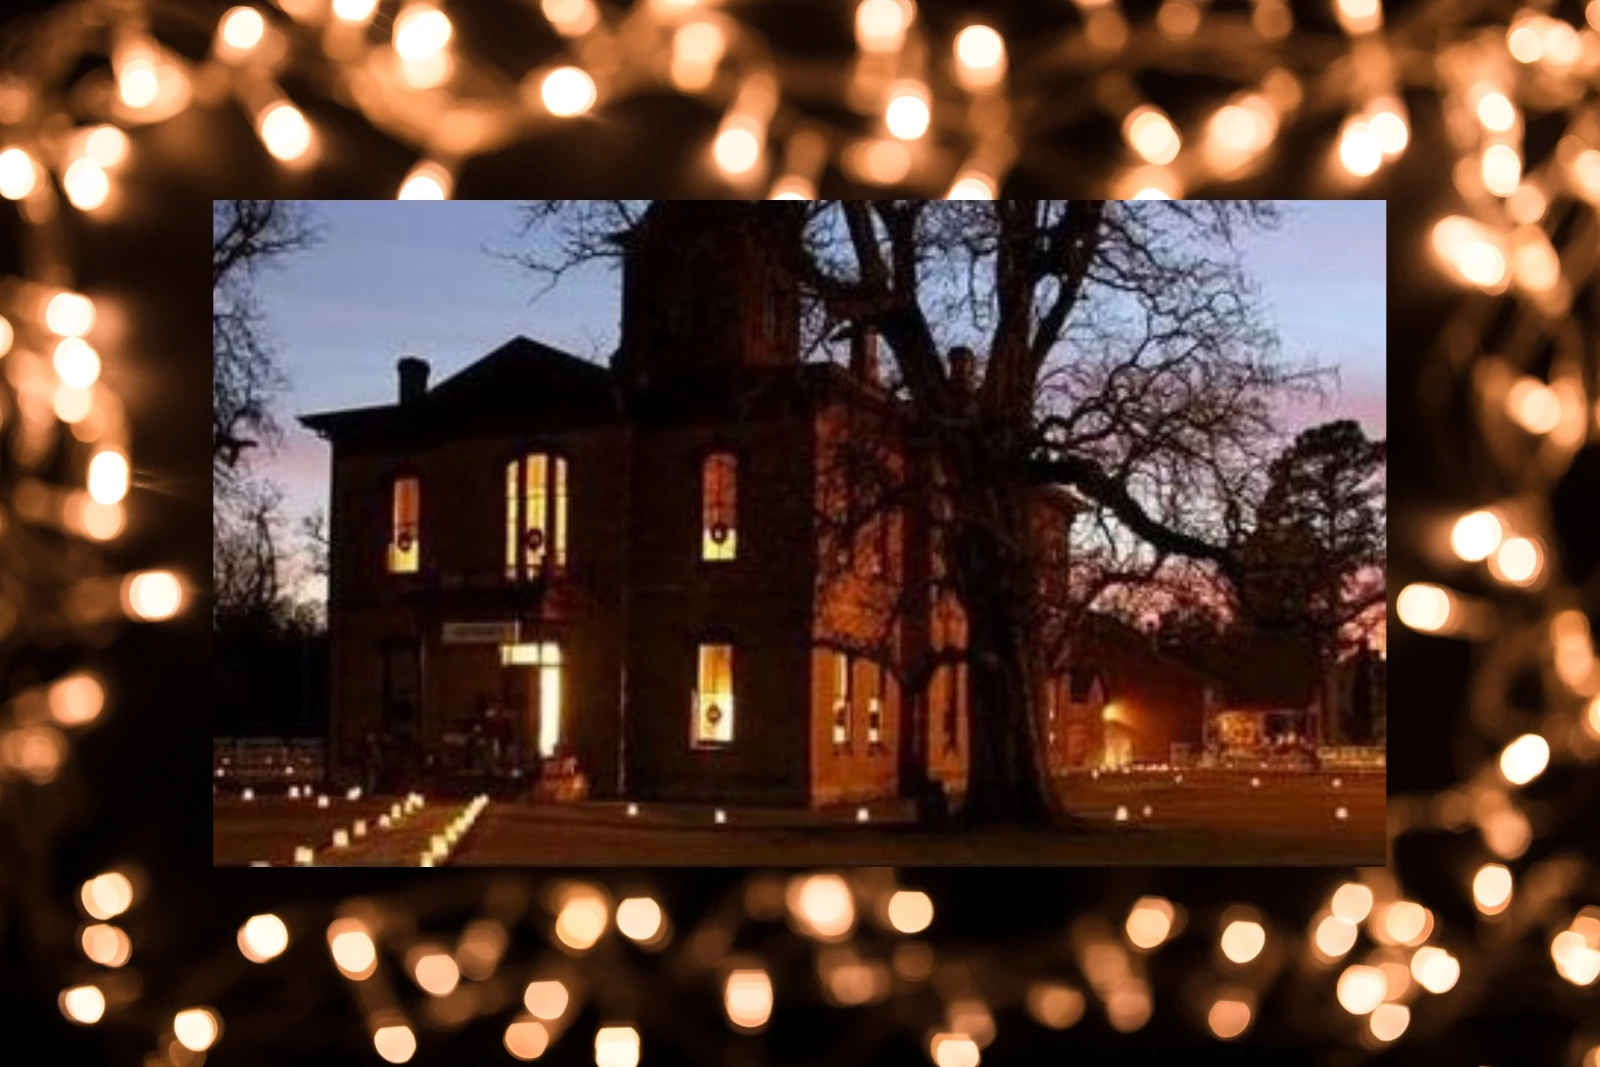 28th Annual Christmas And Candlelight Tour in Old Washington State Park